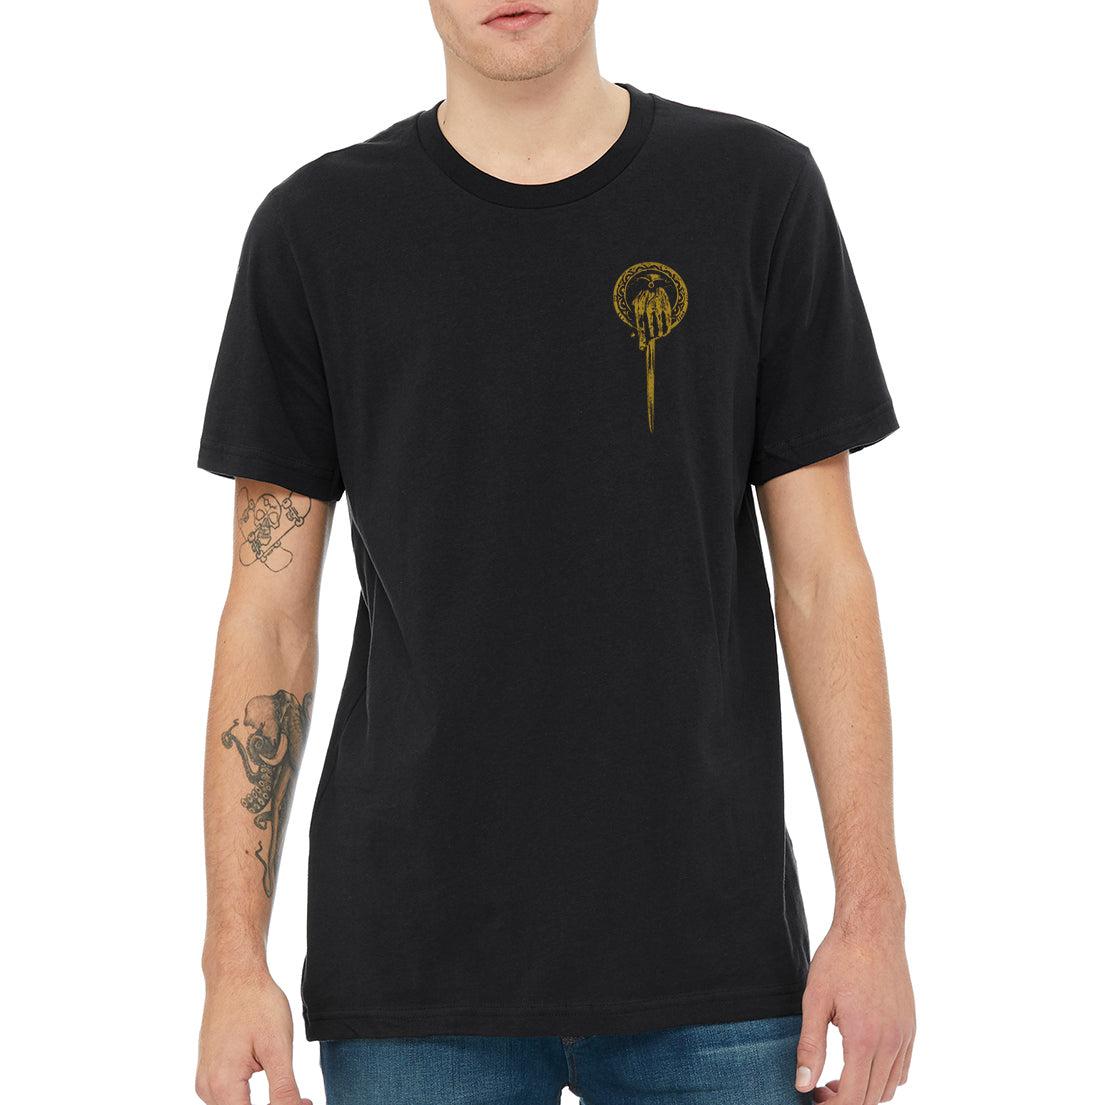 The HAND of the KING Short Sleeve T-SHIRT